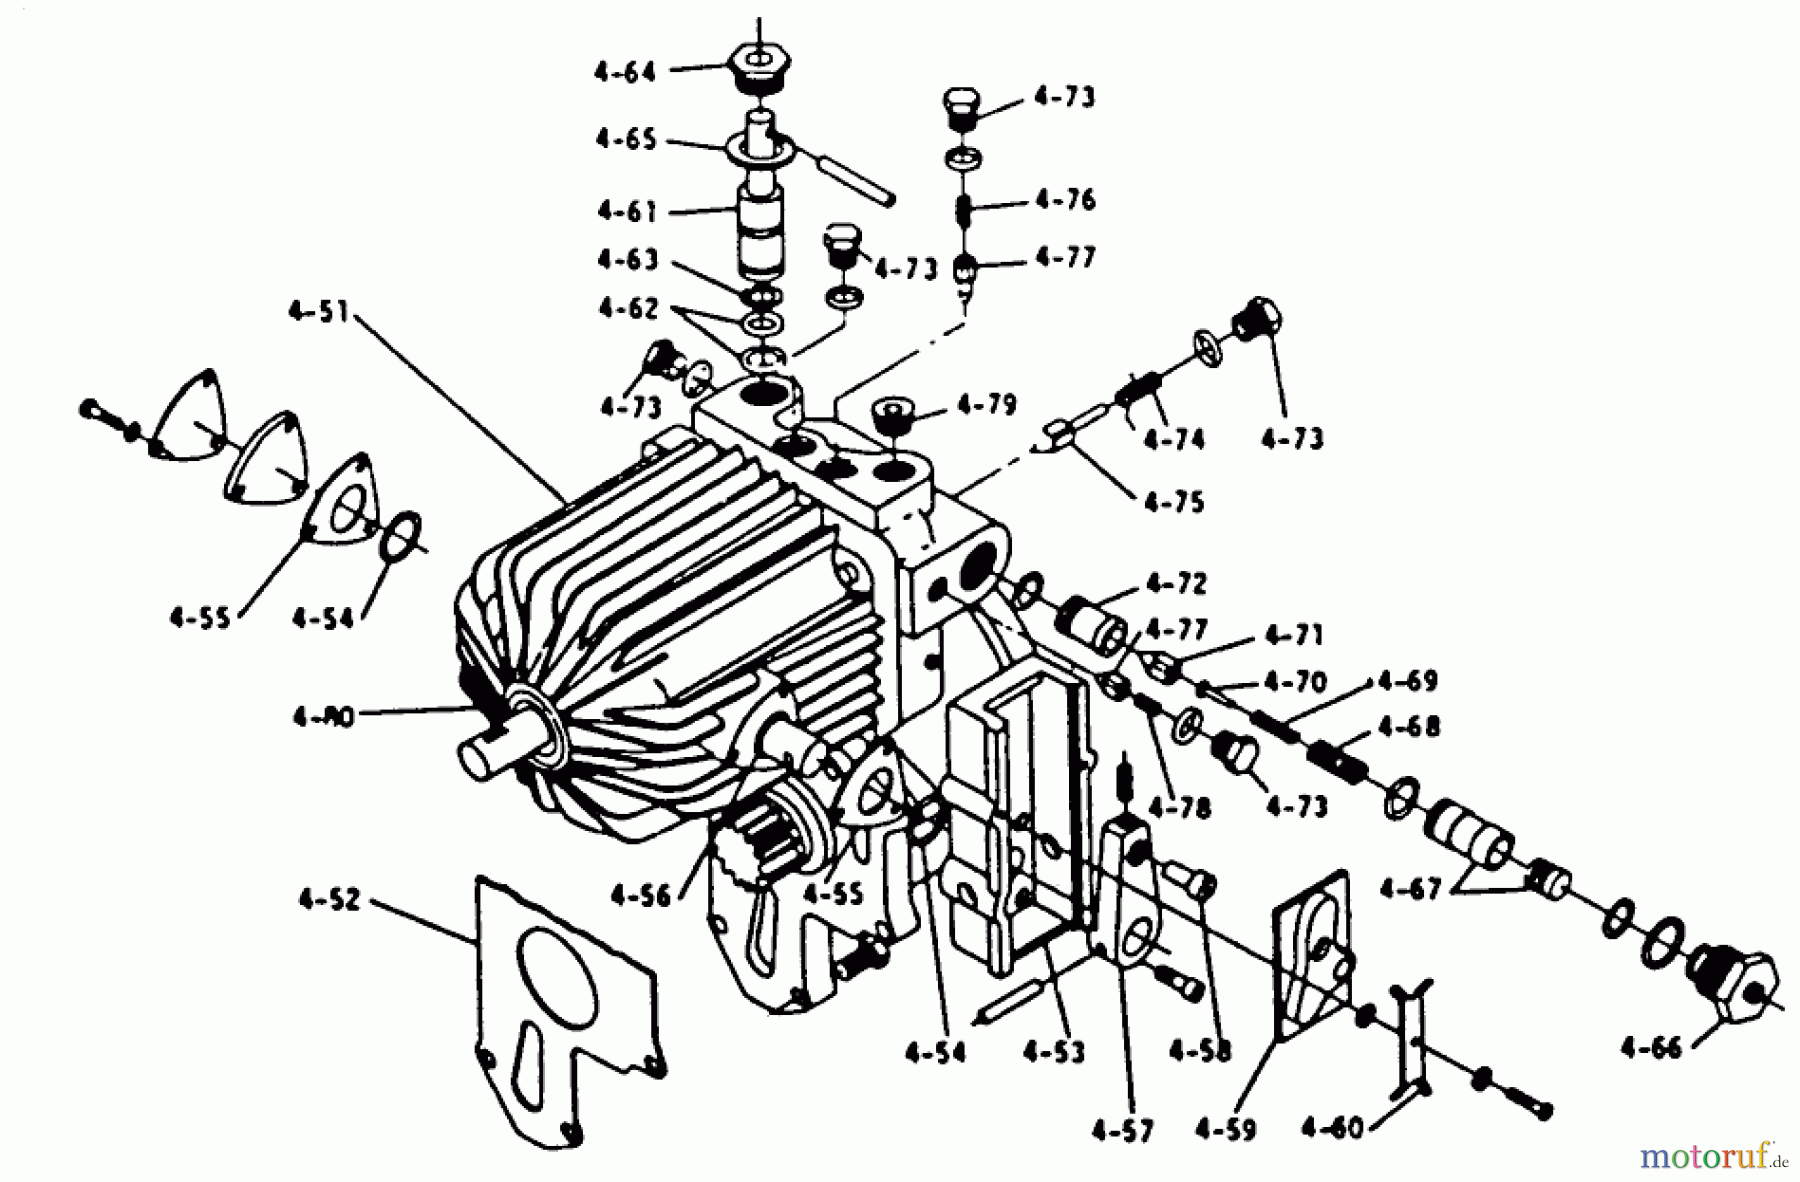  Toro Neu Mowers, Lawn & Garden Tractor Seite 1 1-0430 - Toro 14 hp Automatic Tractor, 1973 PARTS LIST FOR 4.050 HYDROGEAR (PLATE 4.4)